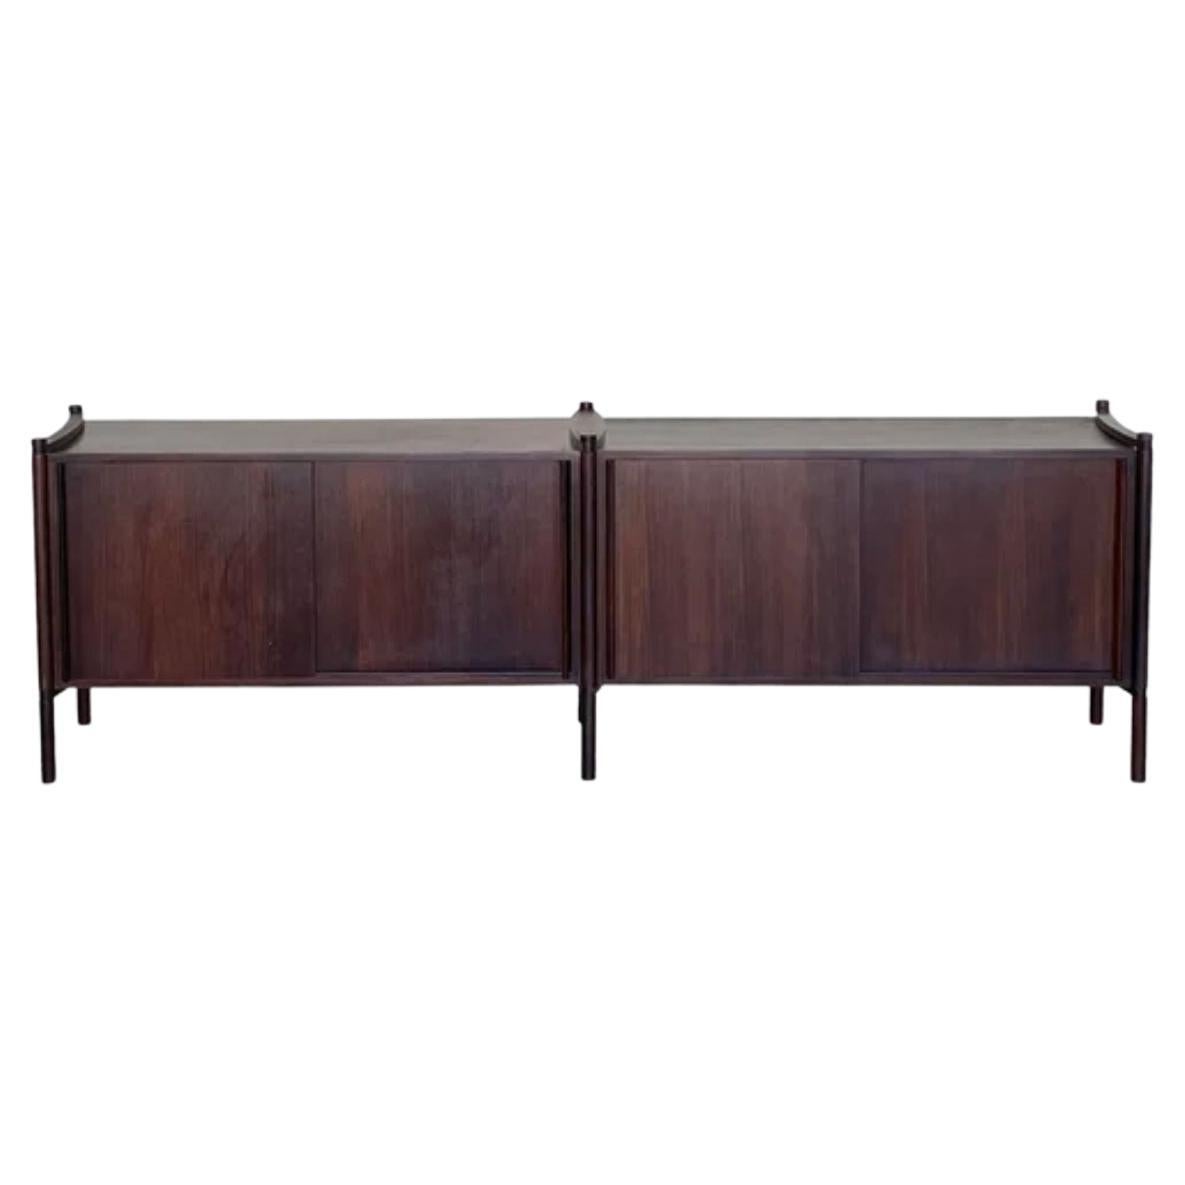 Modular "Archimede" Storage Unit / Credenza in Rosewood by Hirozi Fukuoh, 1962